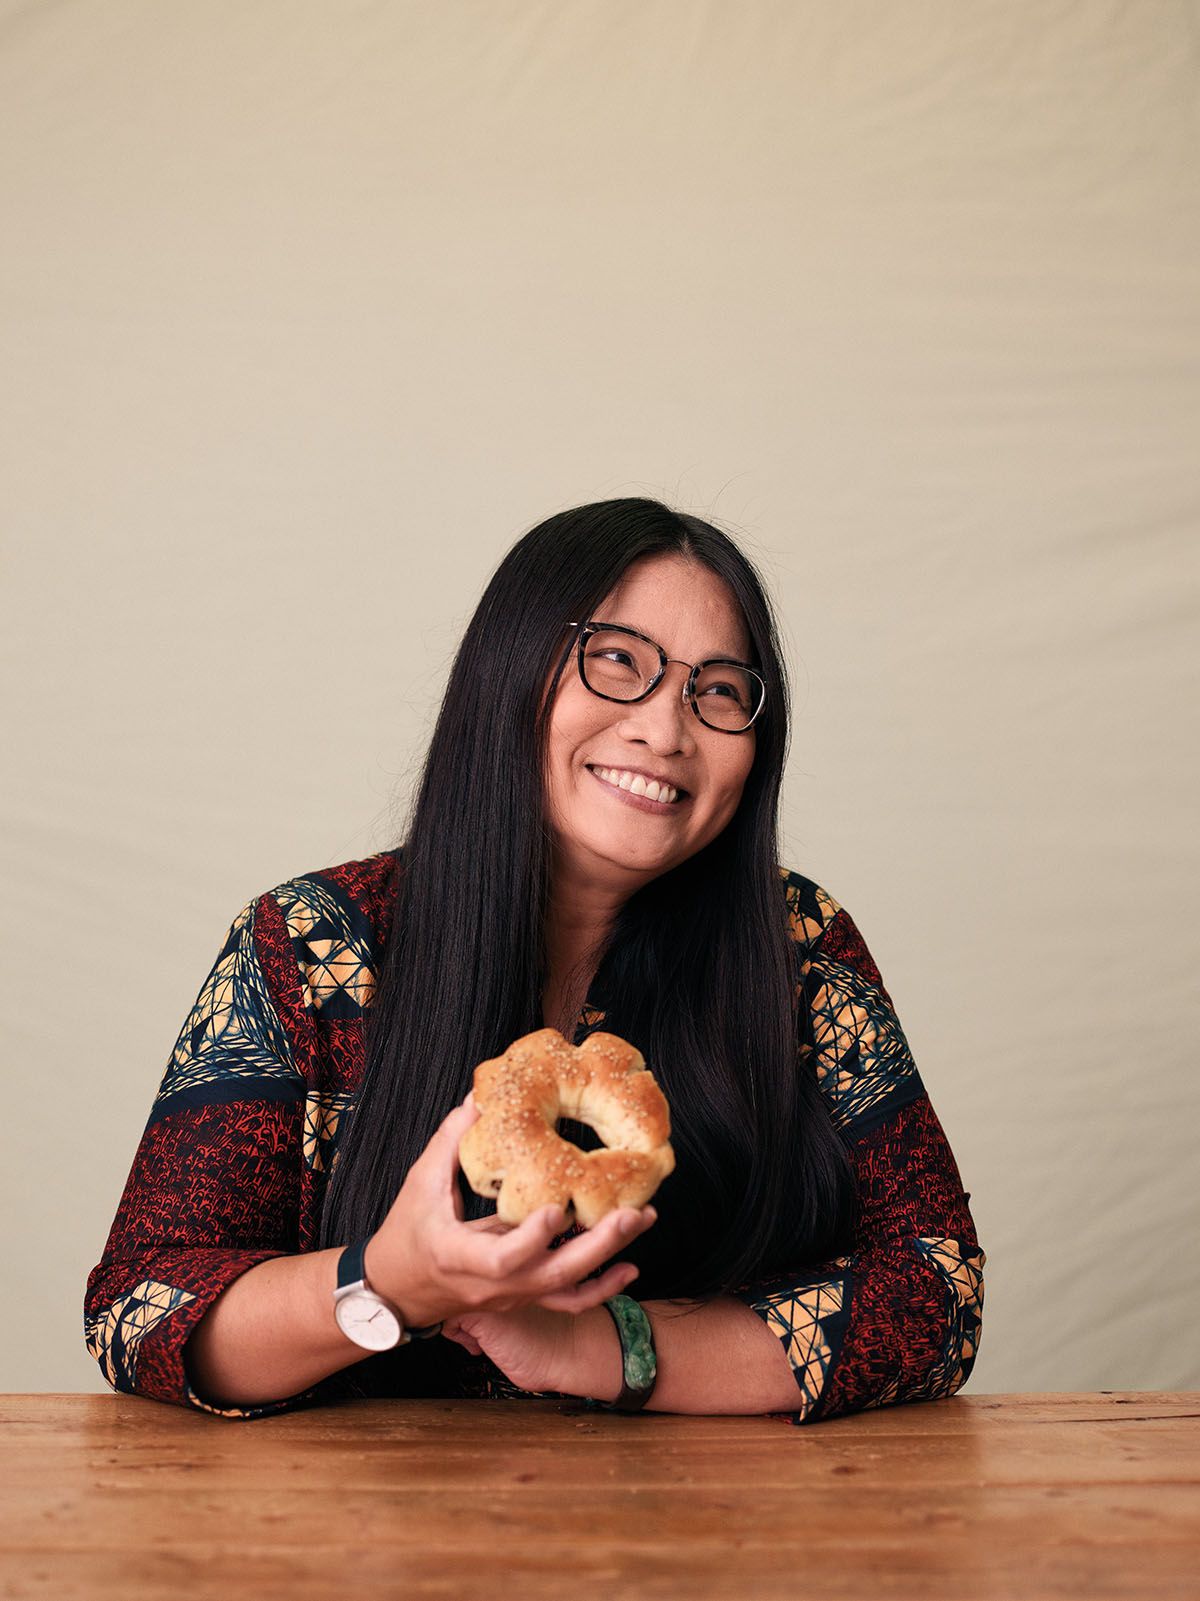 A woman with long dark hair and glasses smiles while holding a bagel in front of a plain background